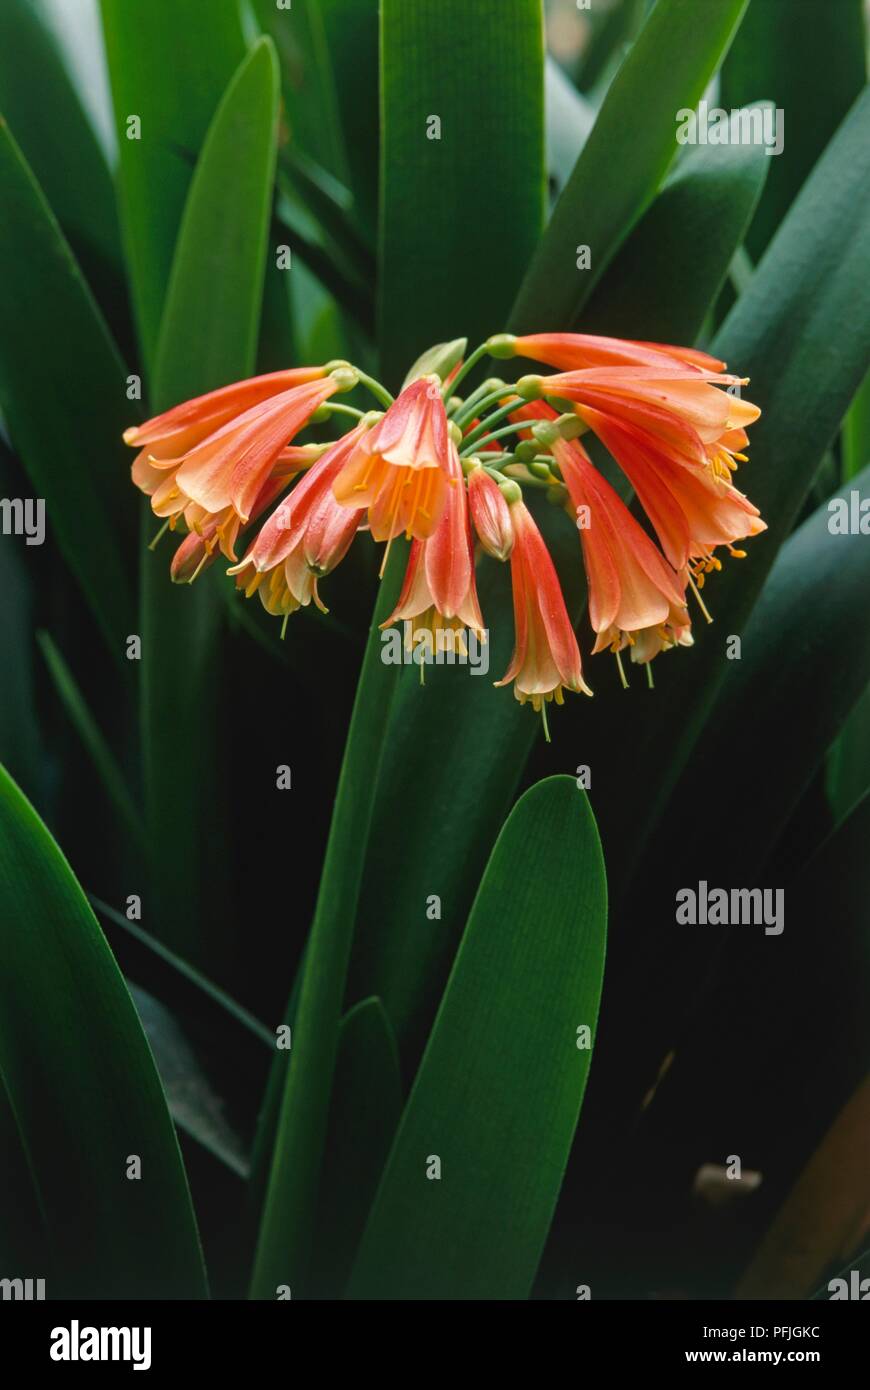 Clivia nobilis (Drooping clivia), plant with pendulous red flowers, close-up Stock Photo